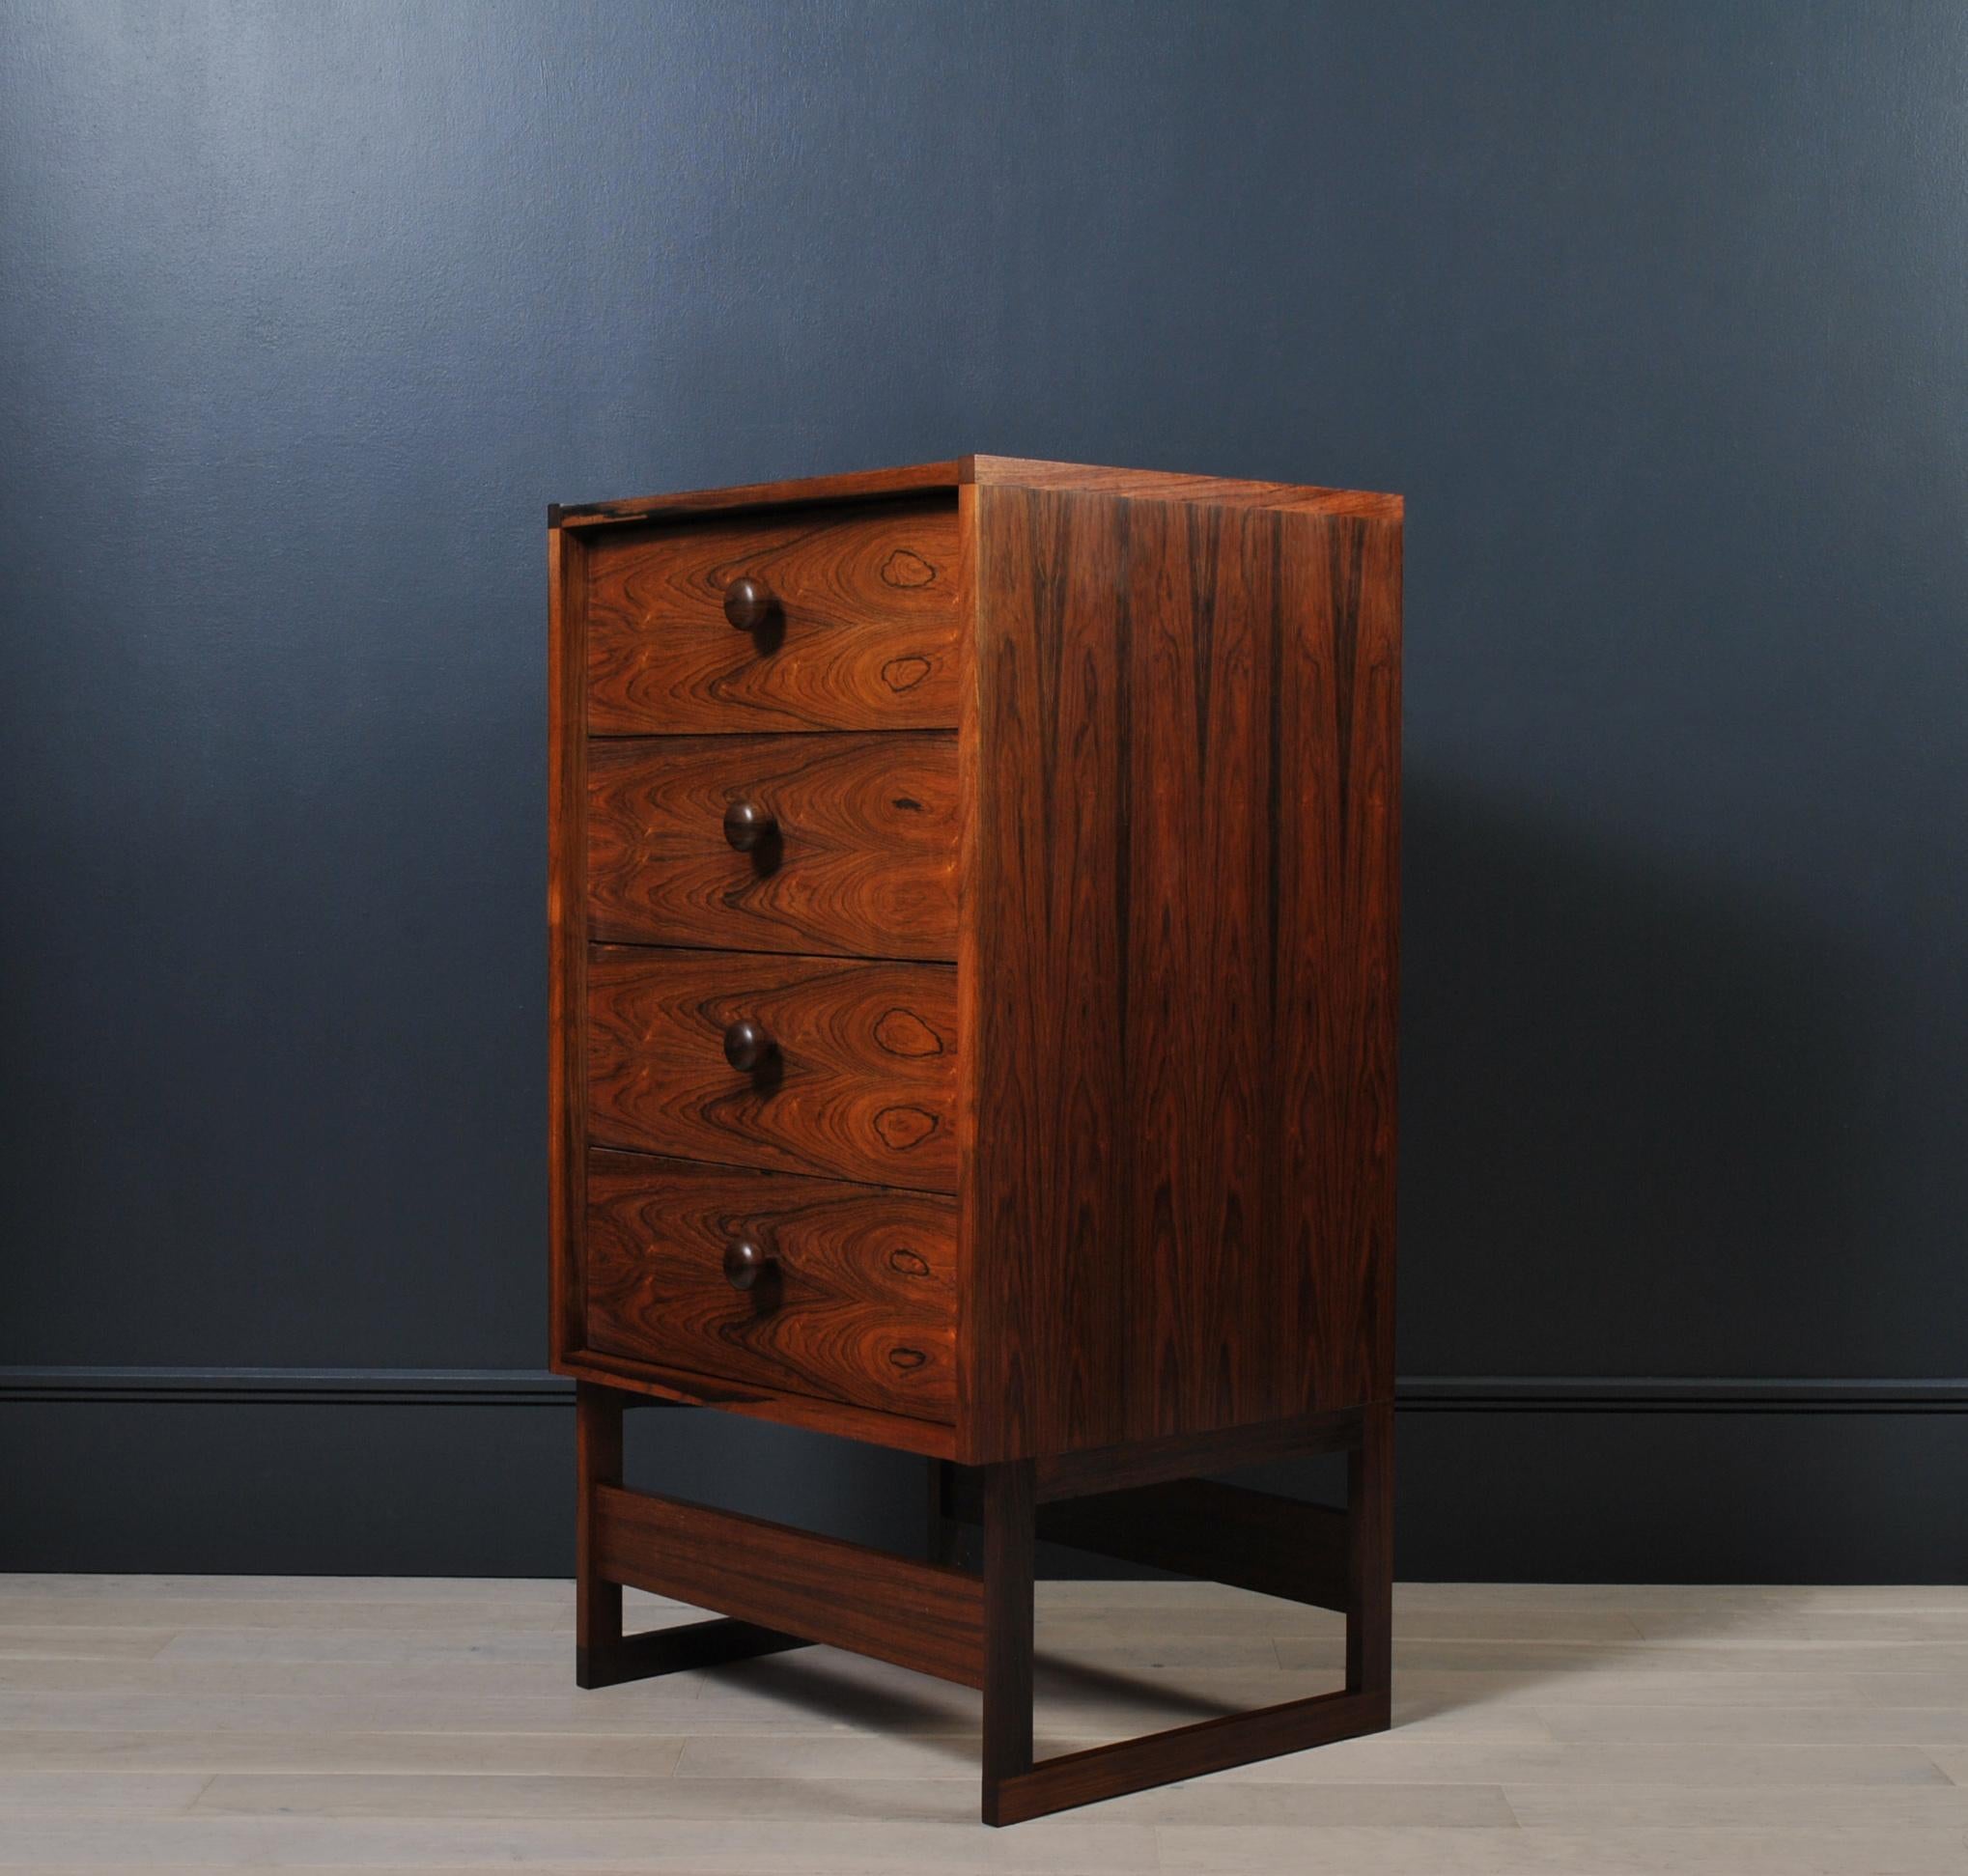 Highly unusual and larger than its appearance tallboy chest of drawers. Idiosyncratic Modernist design from Denmark circa 1960. Extremely well made with lovely turned knobs and dovetail jointed drawers.